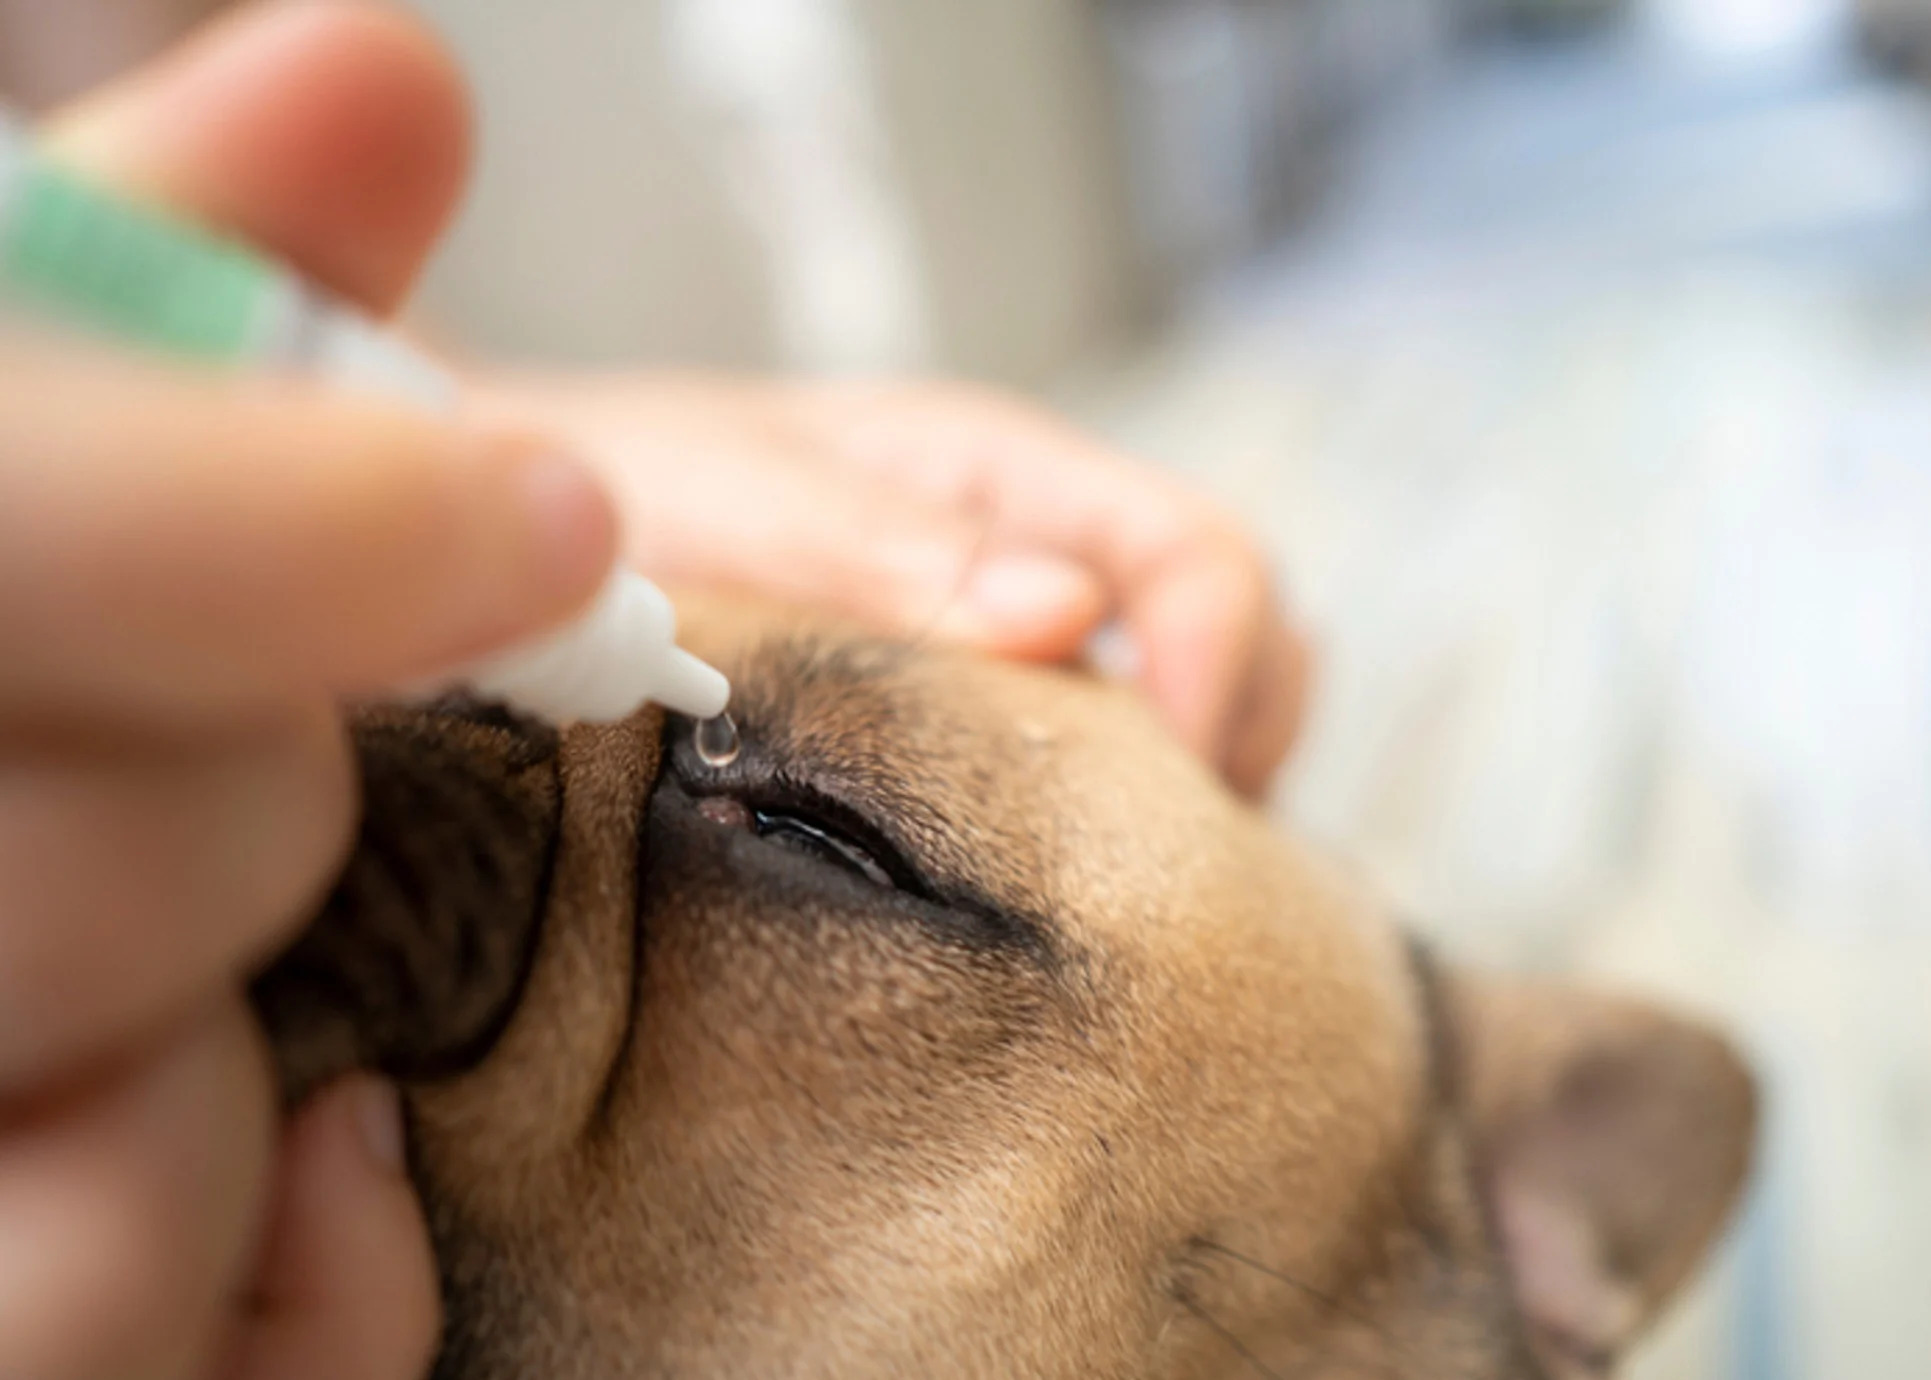 How To Apply Ointment In Dog's Eye